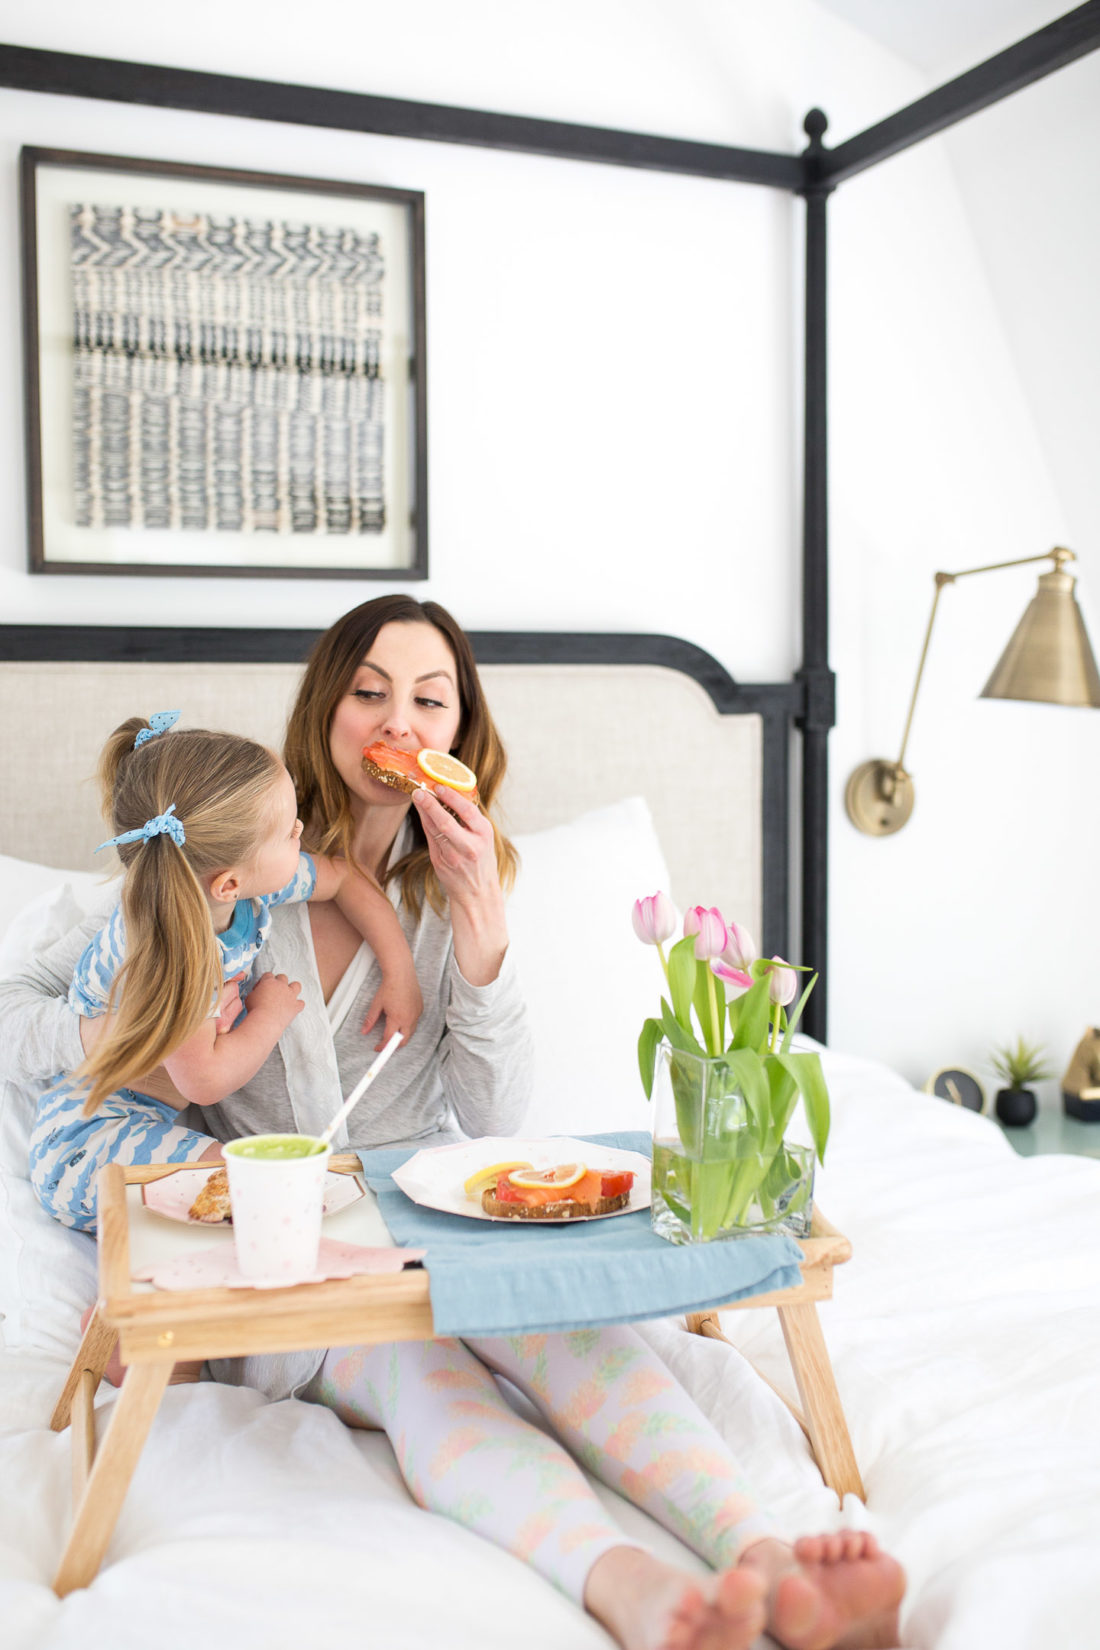 Eva Amurri Martino bites in to Smoked Salmon toast as part of a Mother's Day breakfast in bed